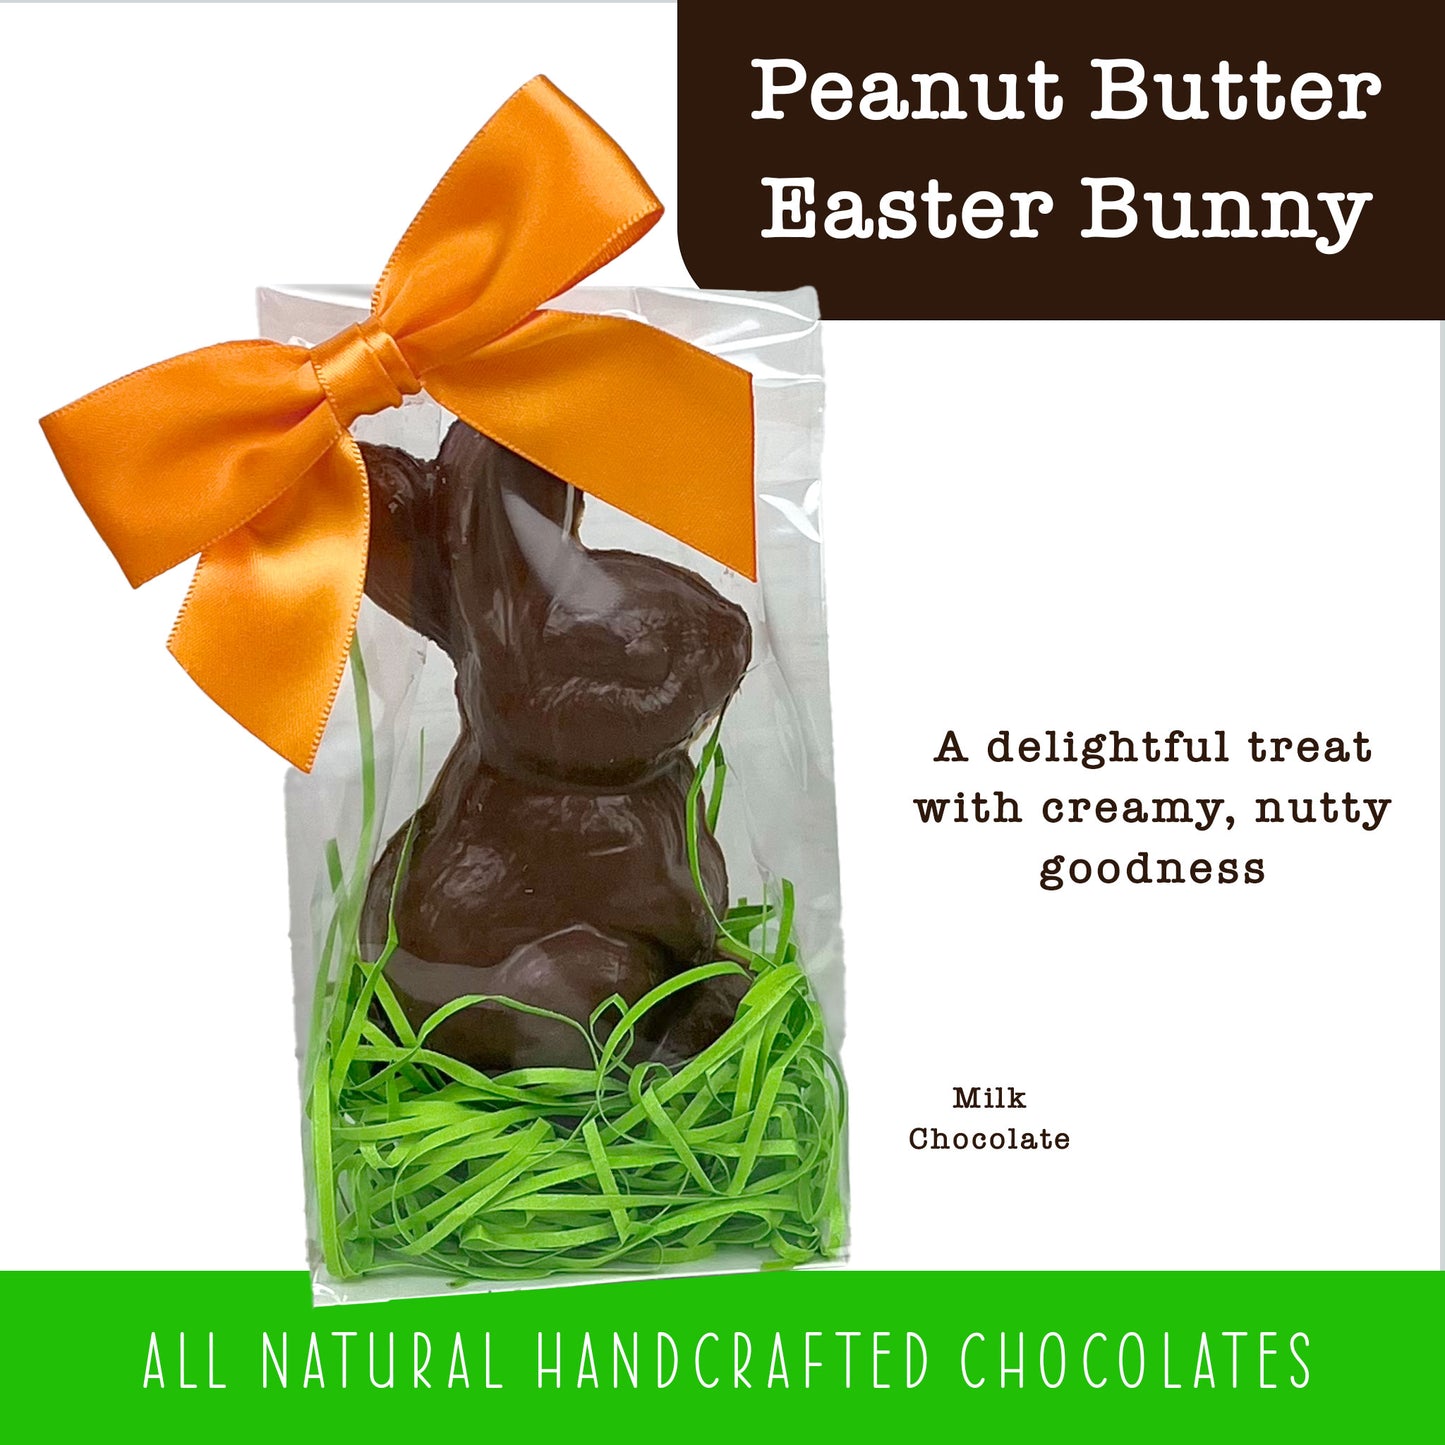 Easter Bunny - Peanut Butter